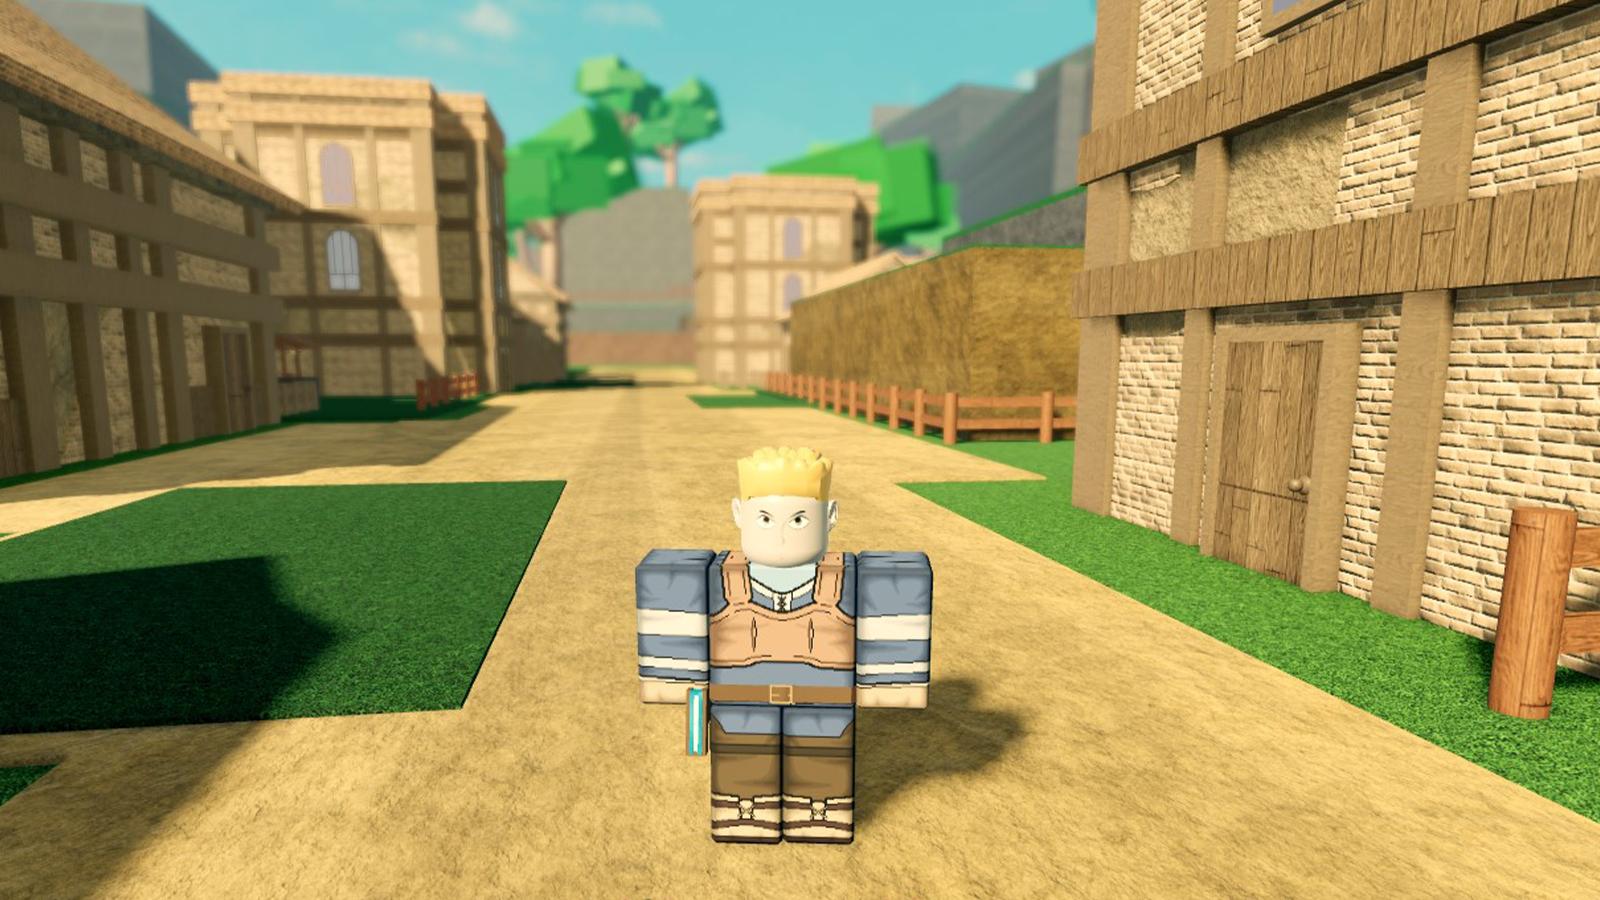 An image of a character from Era of Althea in Roblox